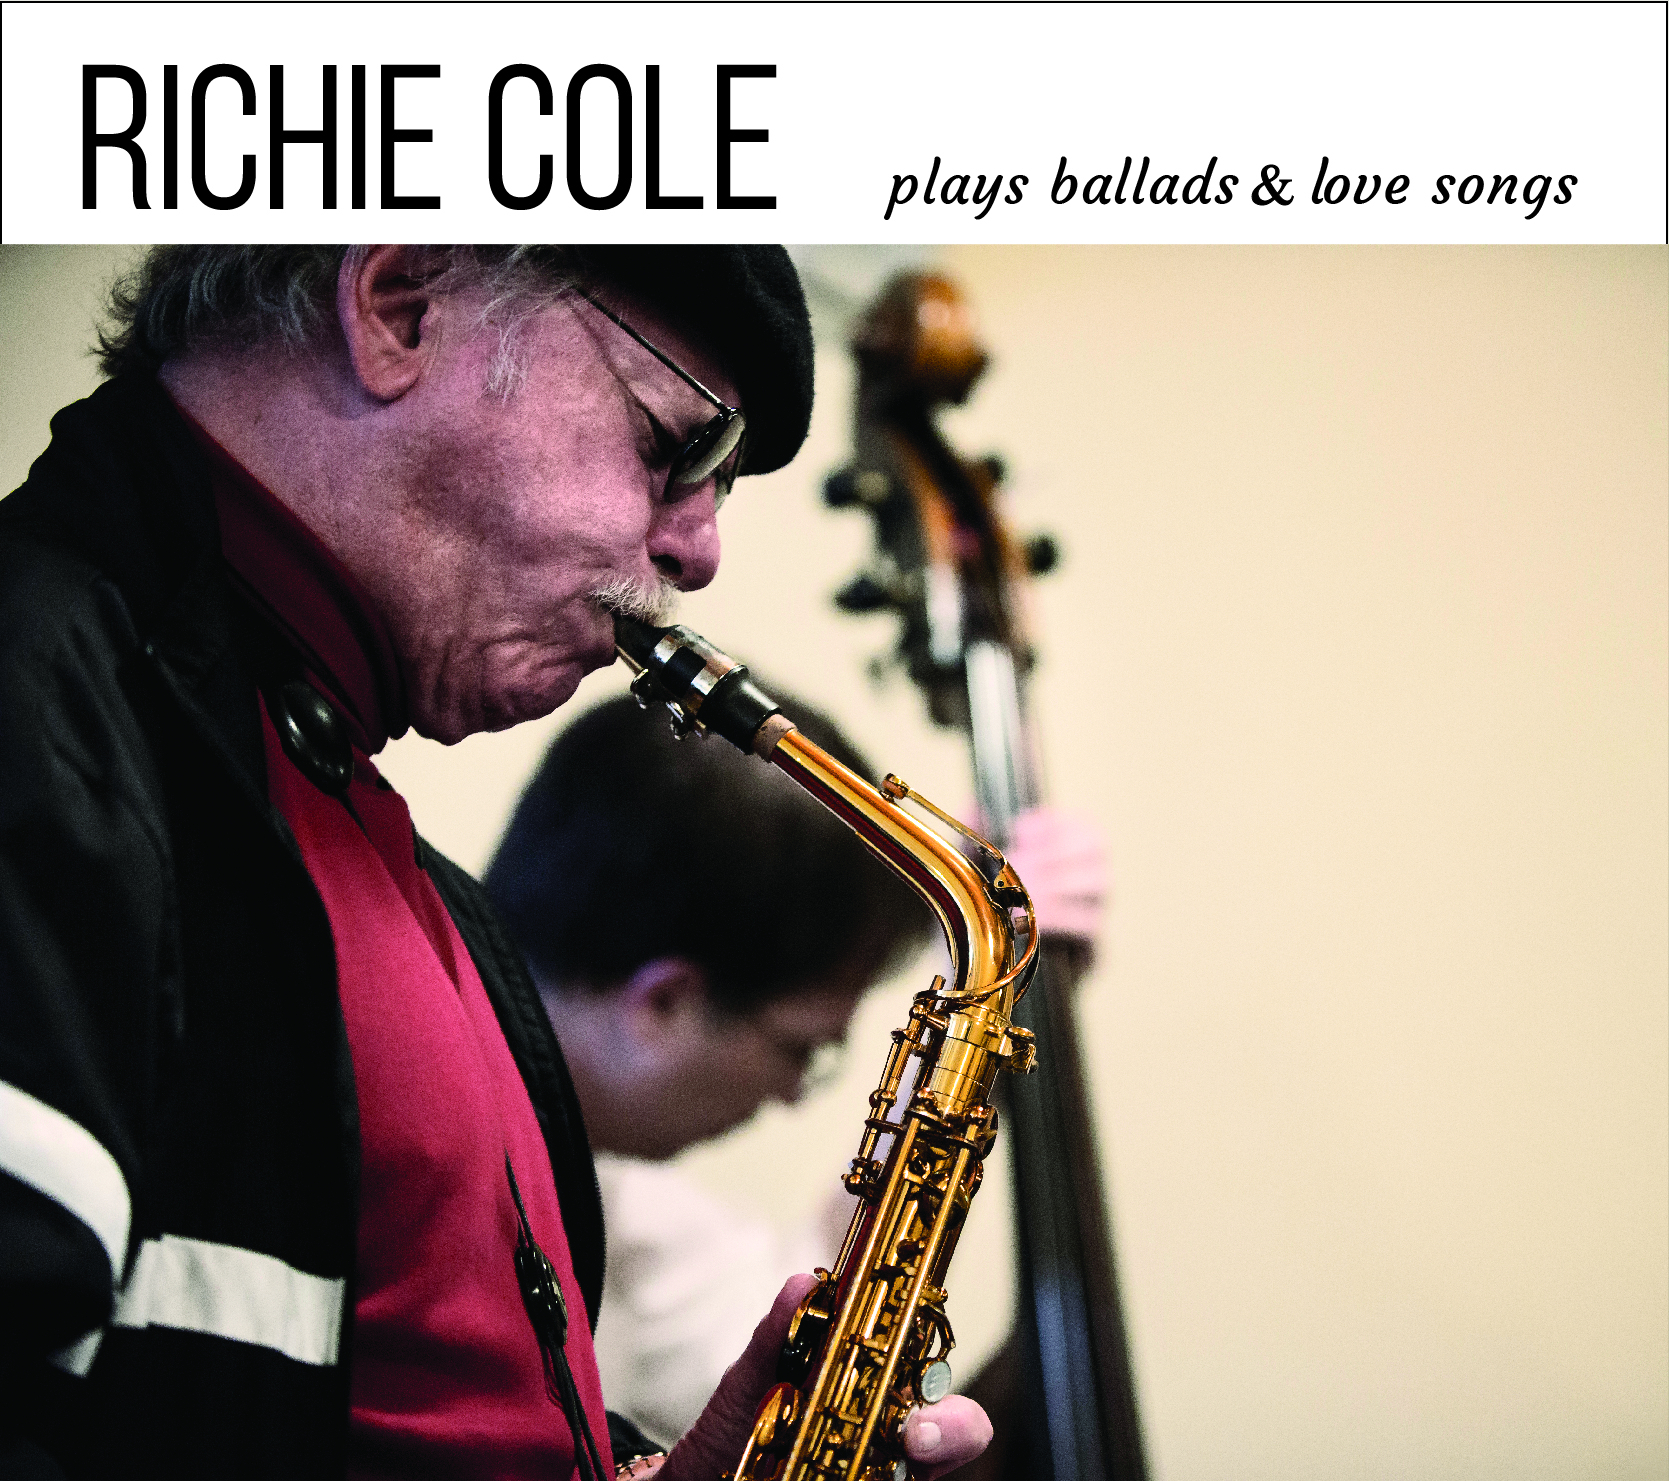 richie%20cole%20cd%20cover_hires.jpg